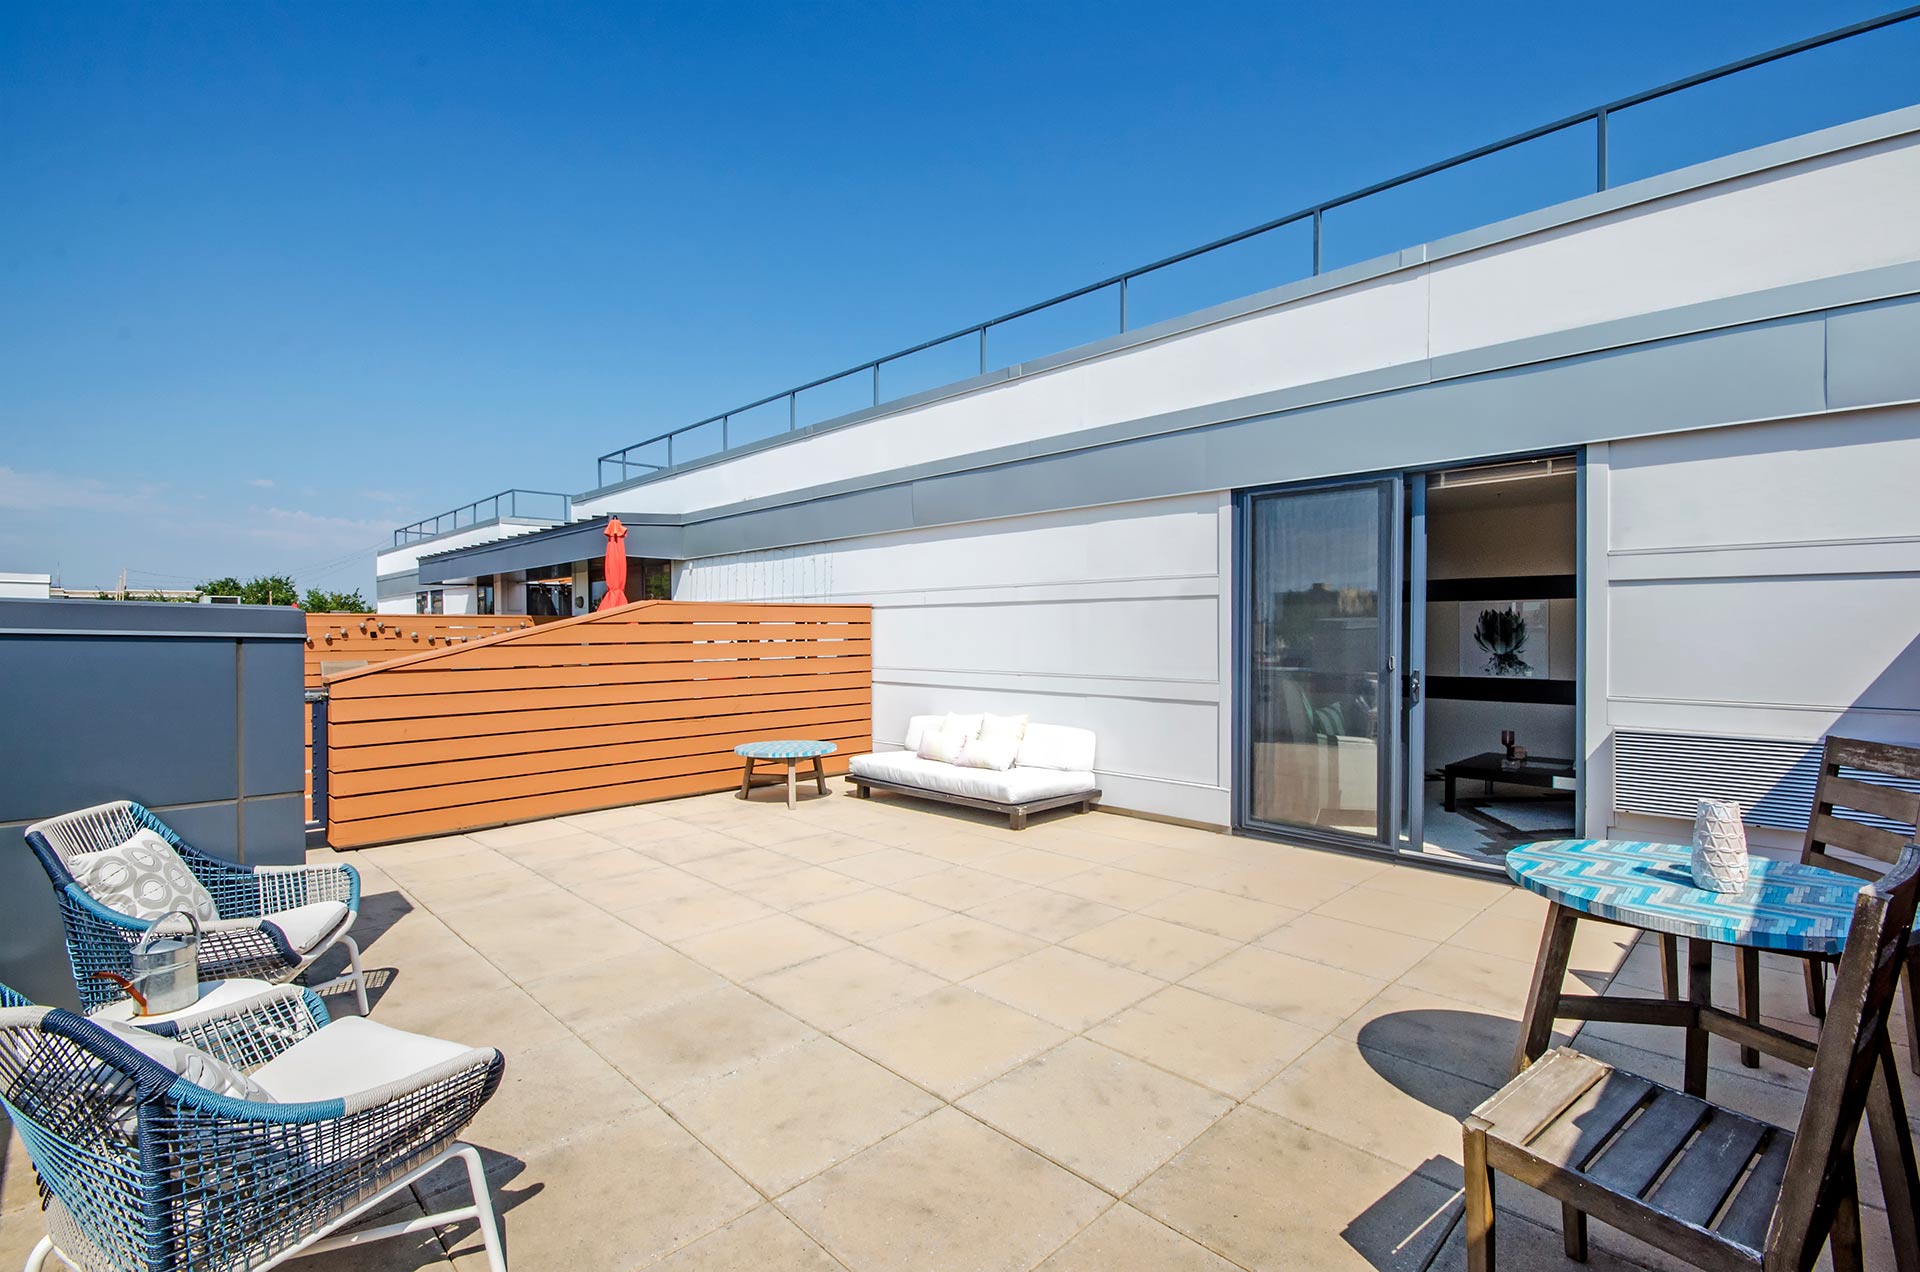 Expansive shot of outdoor furniture on private roof terrace with sliding doors open to apartment loft space inside